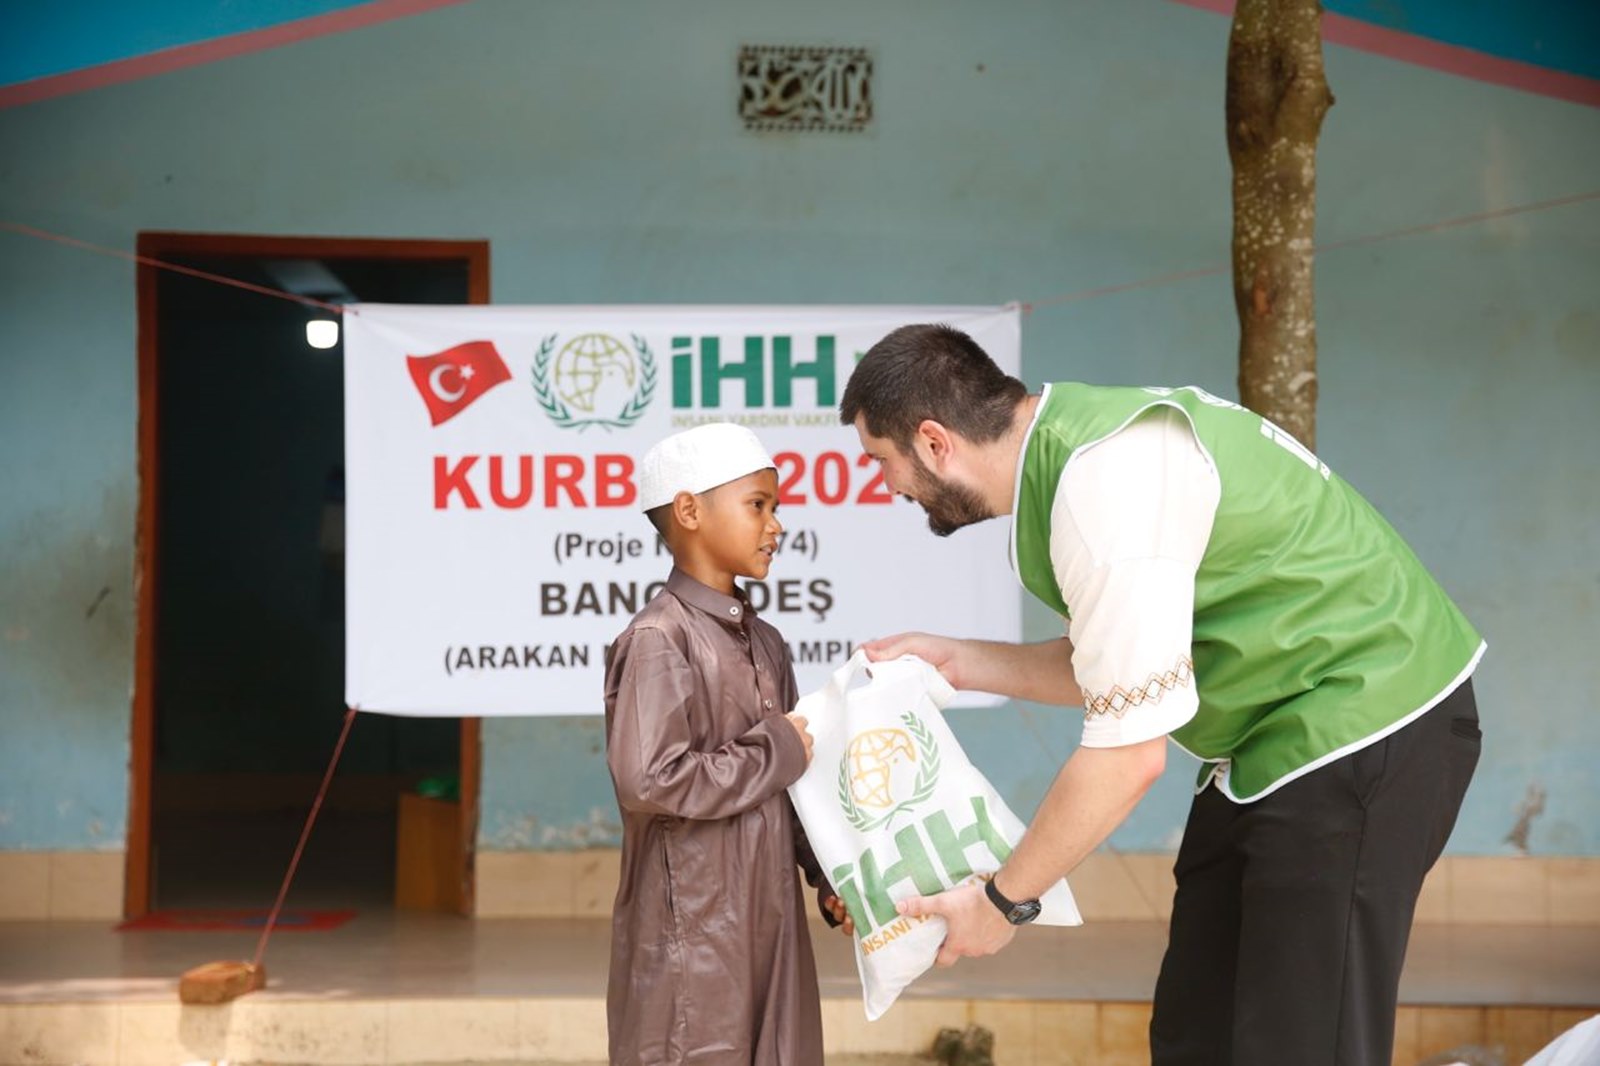 IHH distributed qurbani meats to people in need in 66 countries